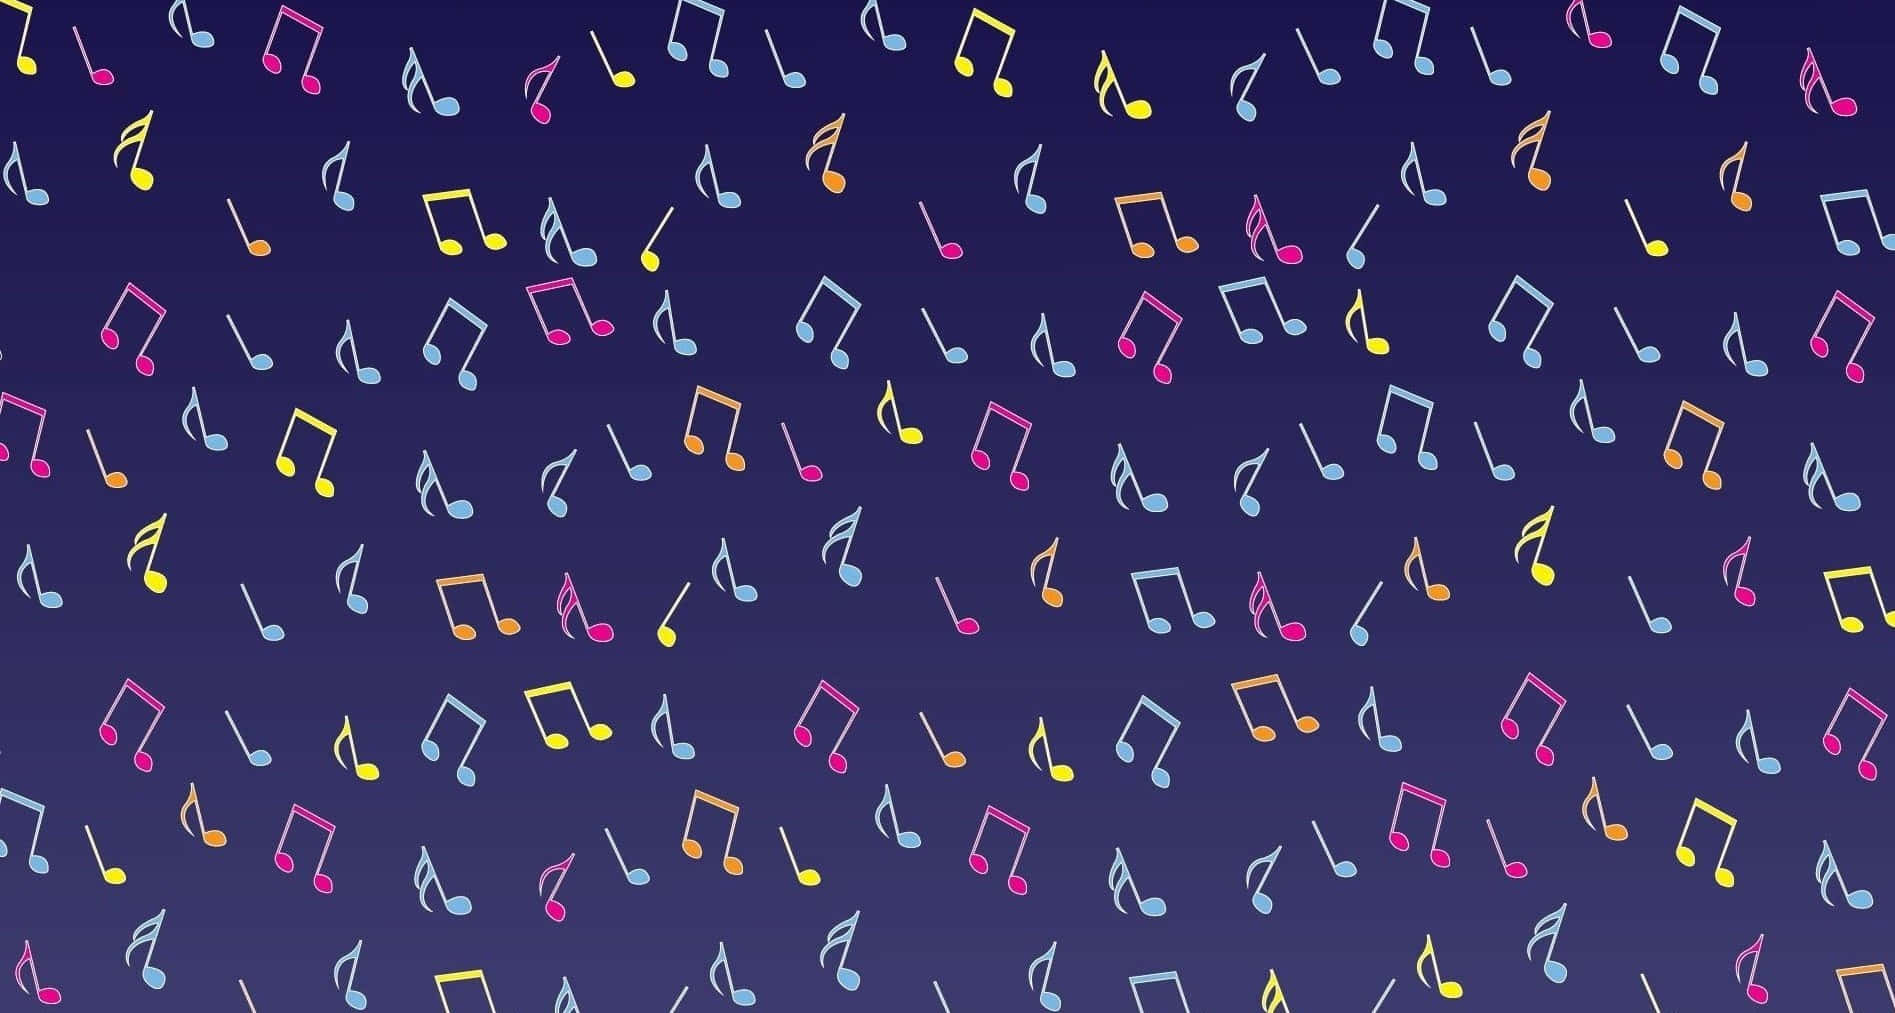 Colorful Music Notes on a Vintage Background